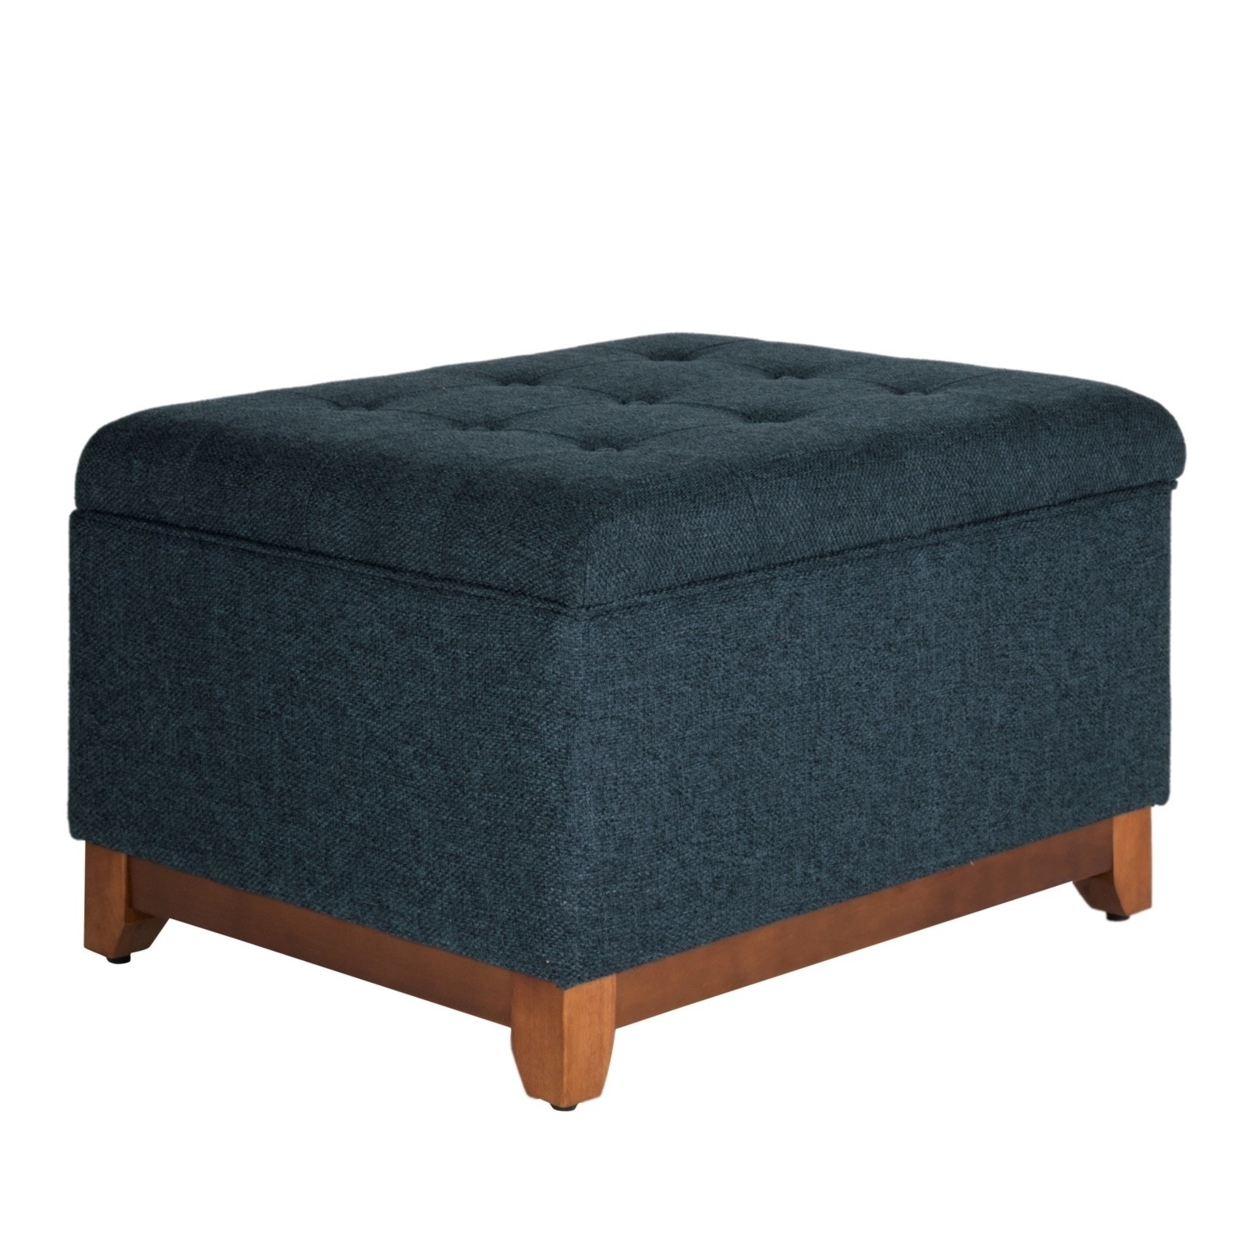 Textured Fabric Upholstered Wooden Ottoman With Button Tufted Top, Blue And Brown- Saltoro Sherpi